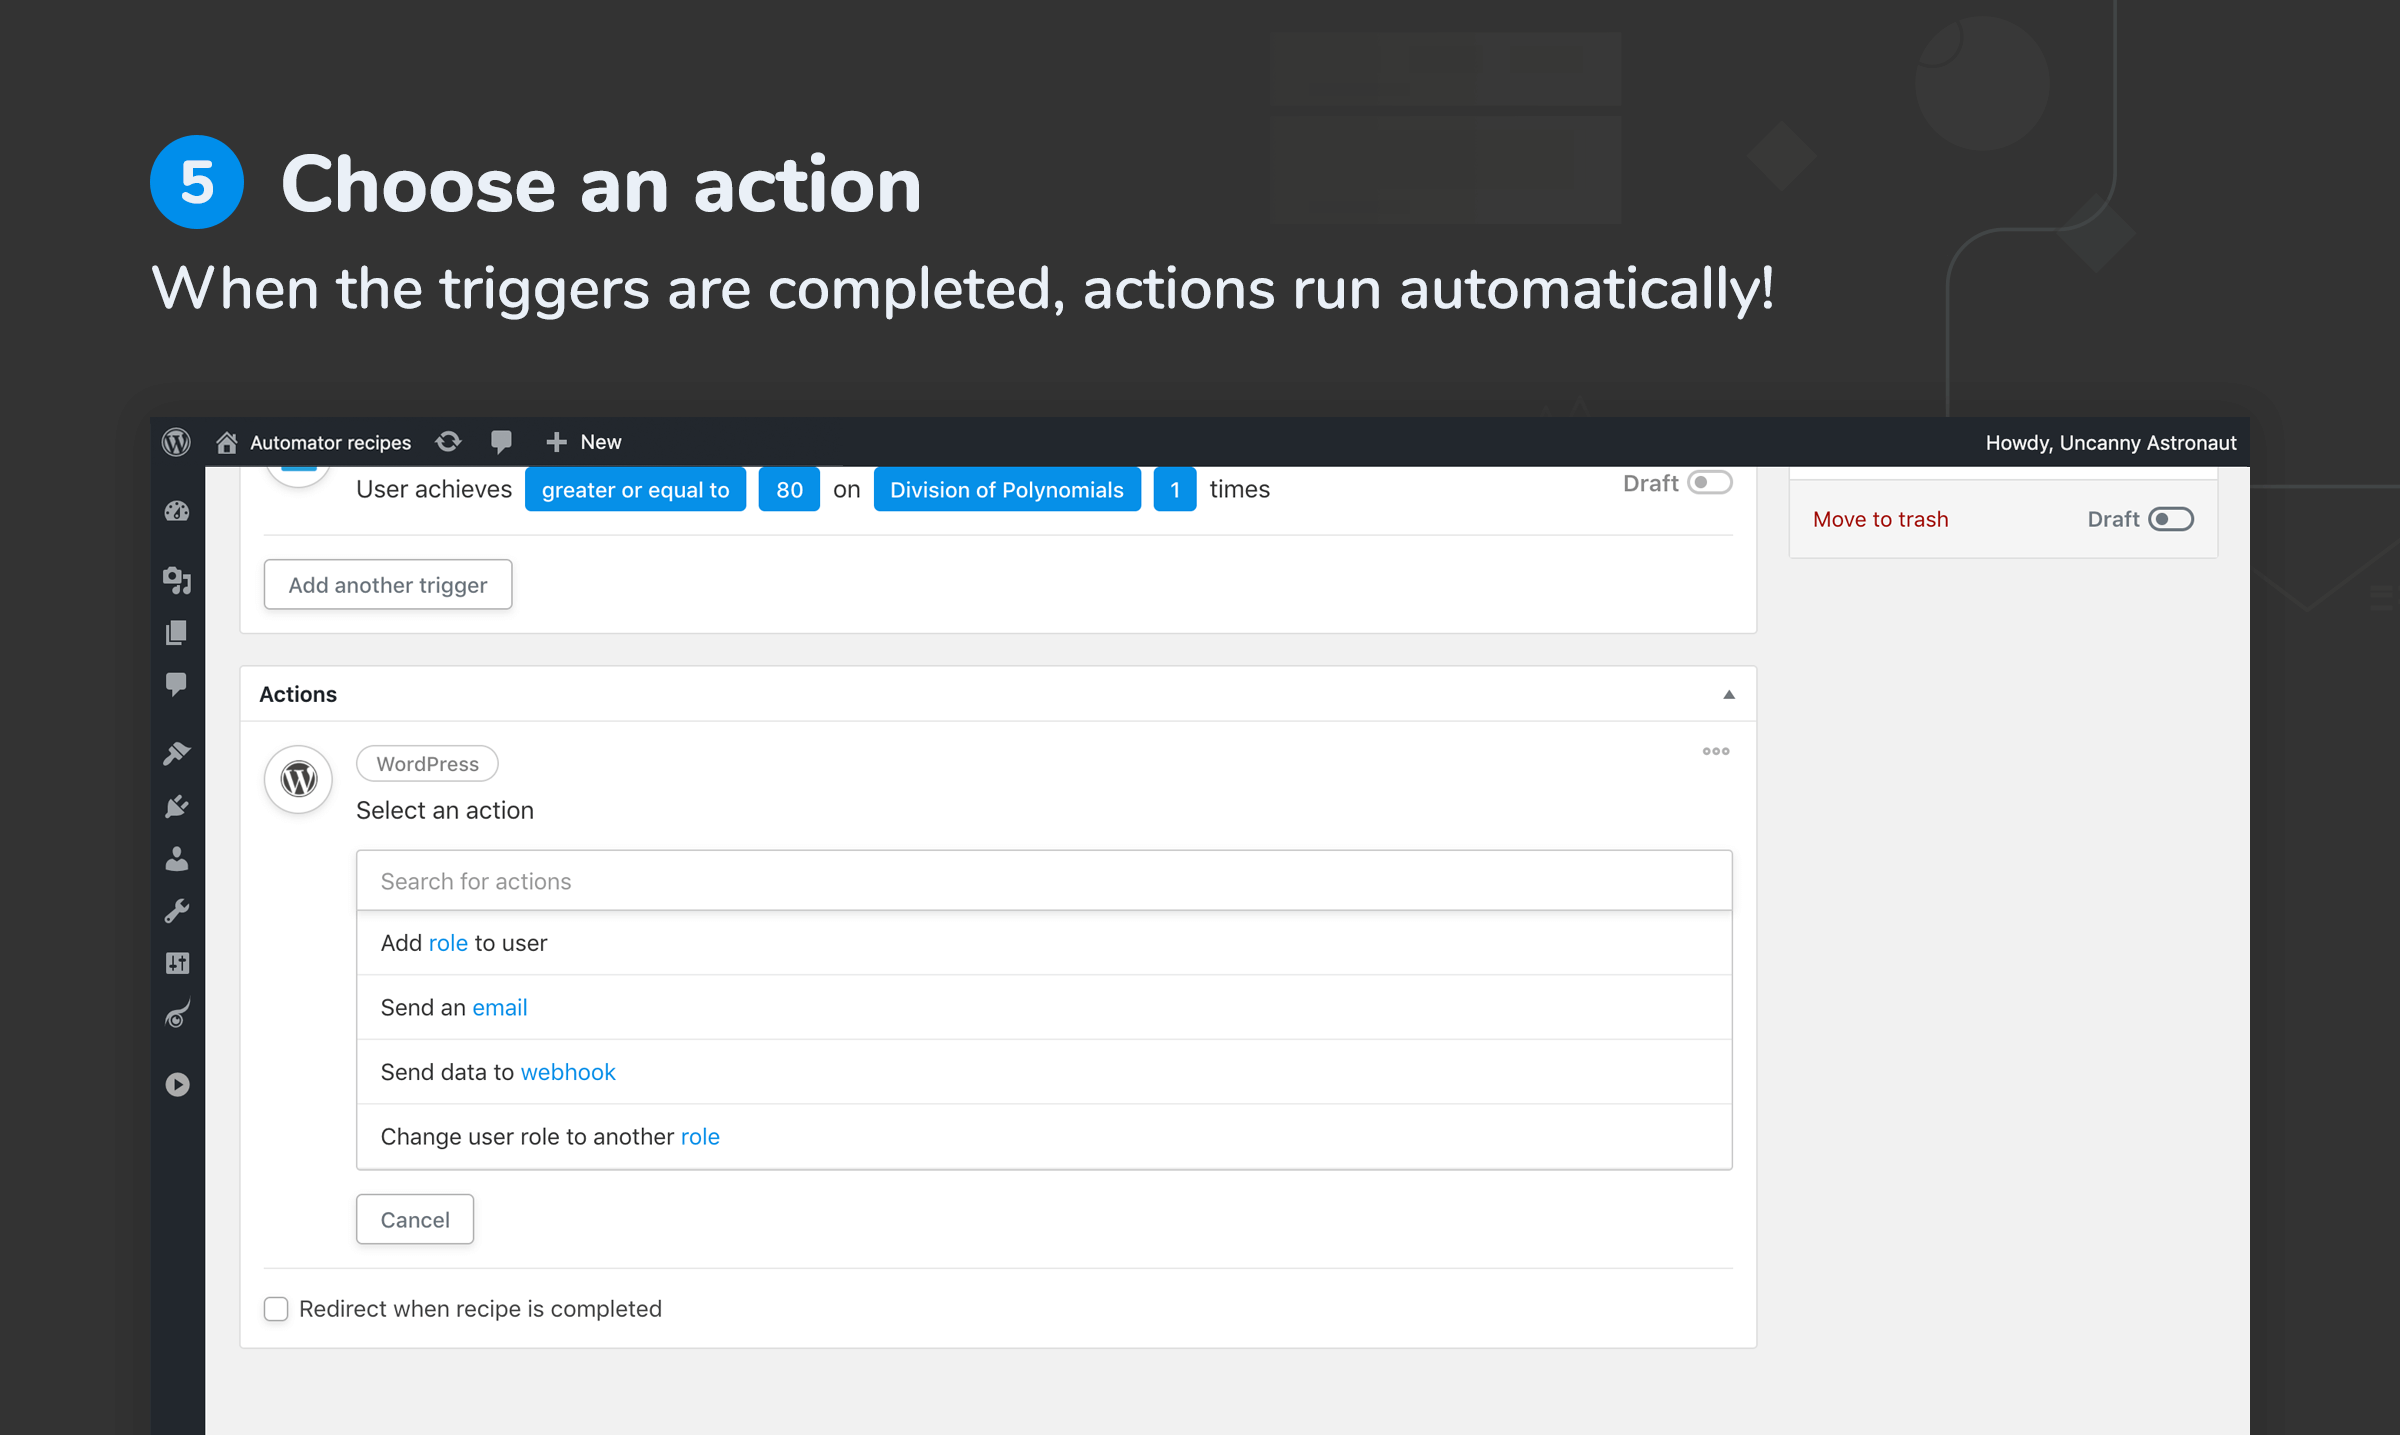 When the triggers are completed, actions run automatically